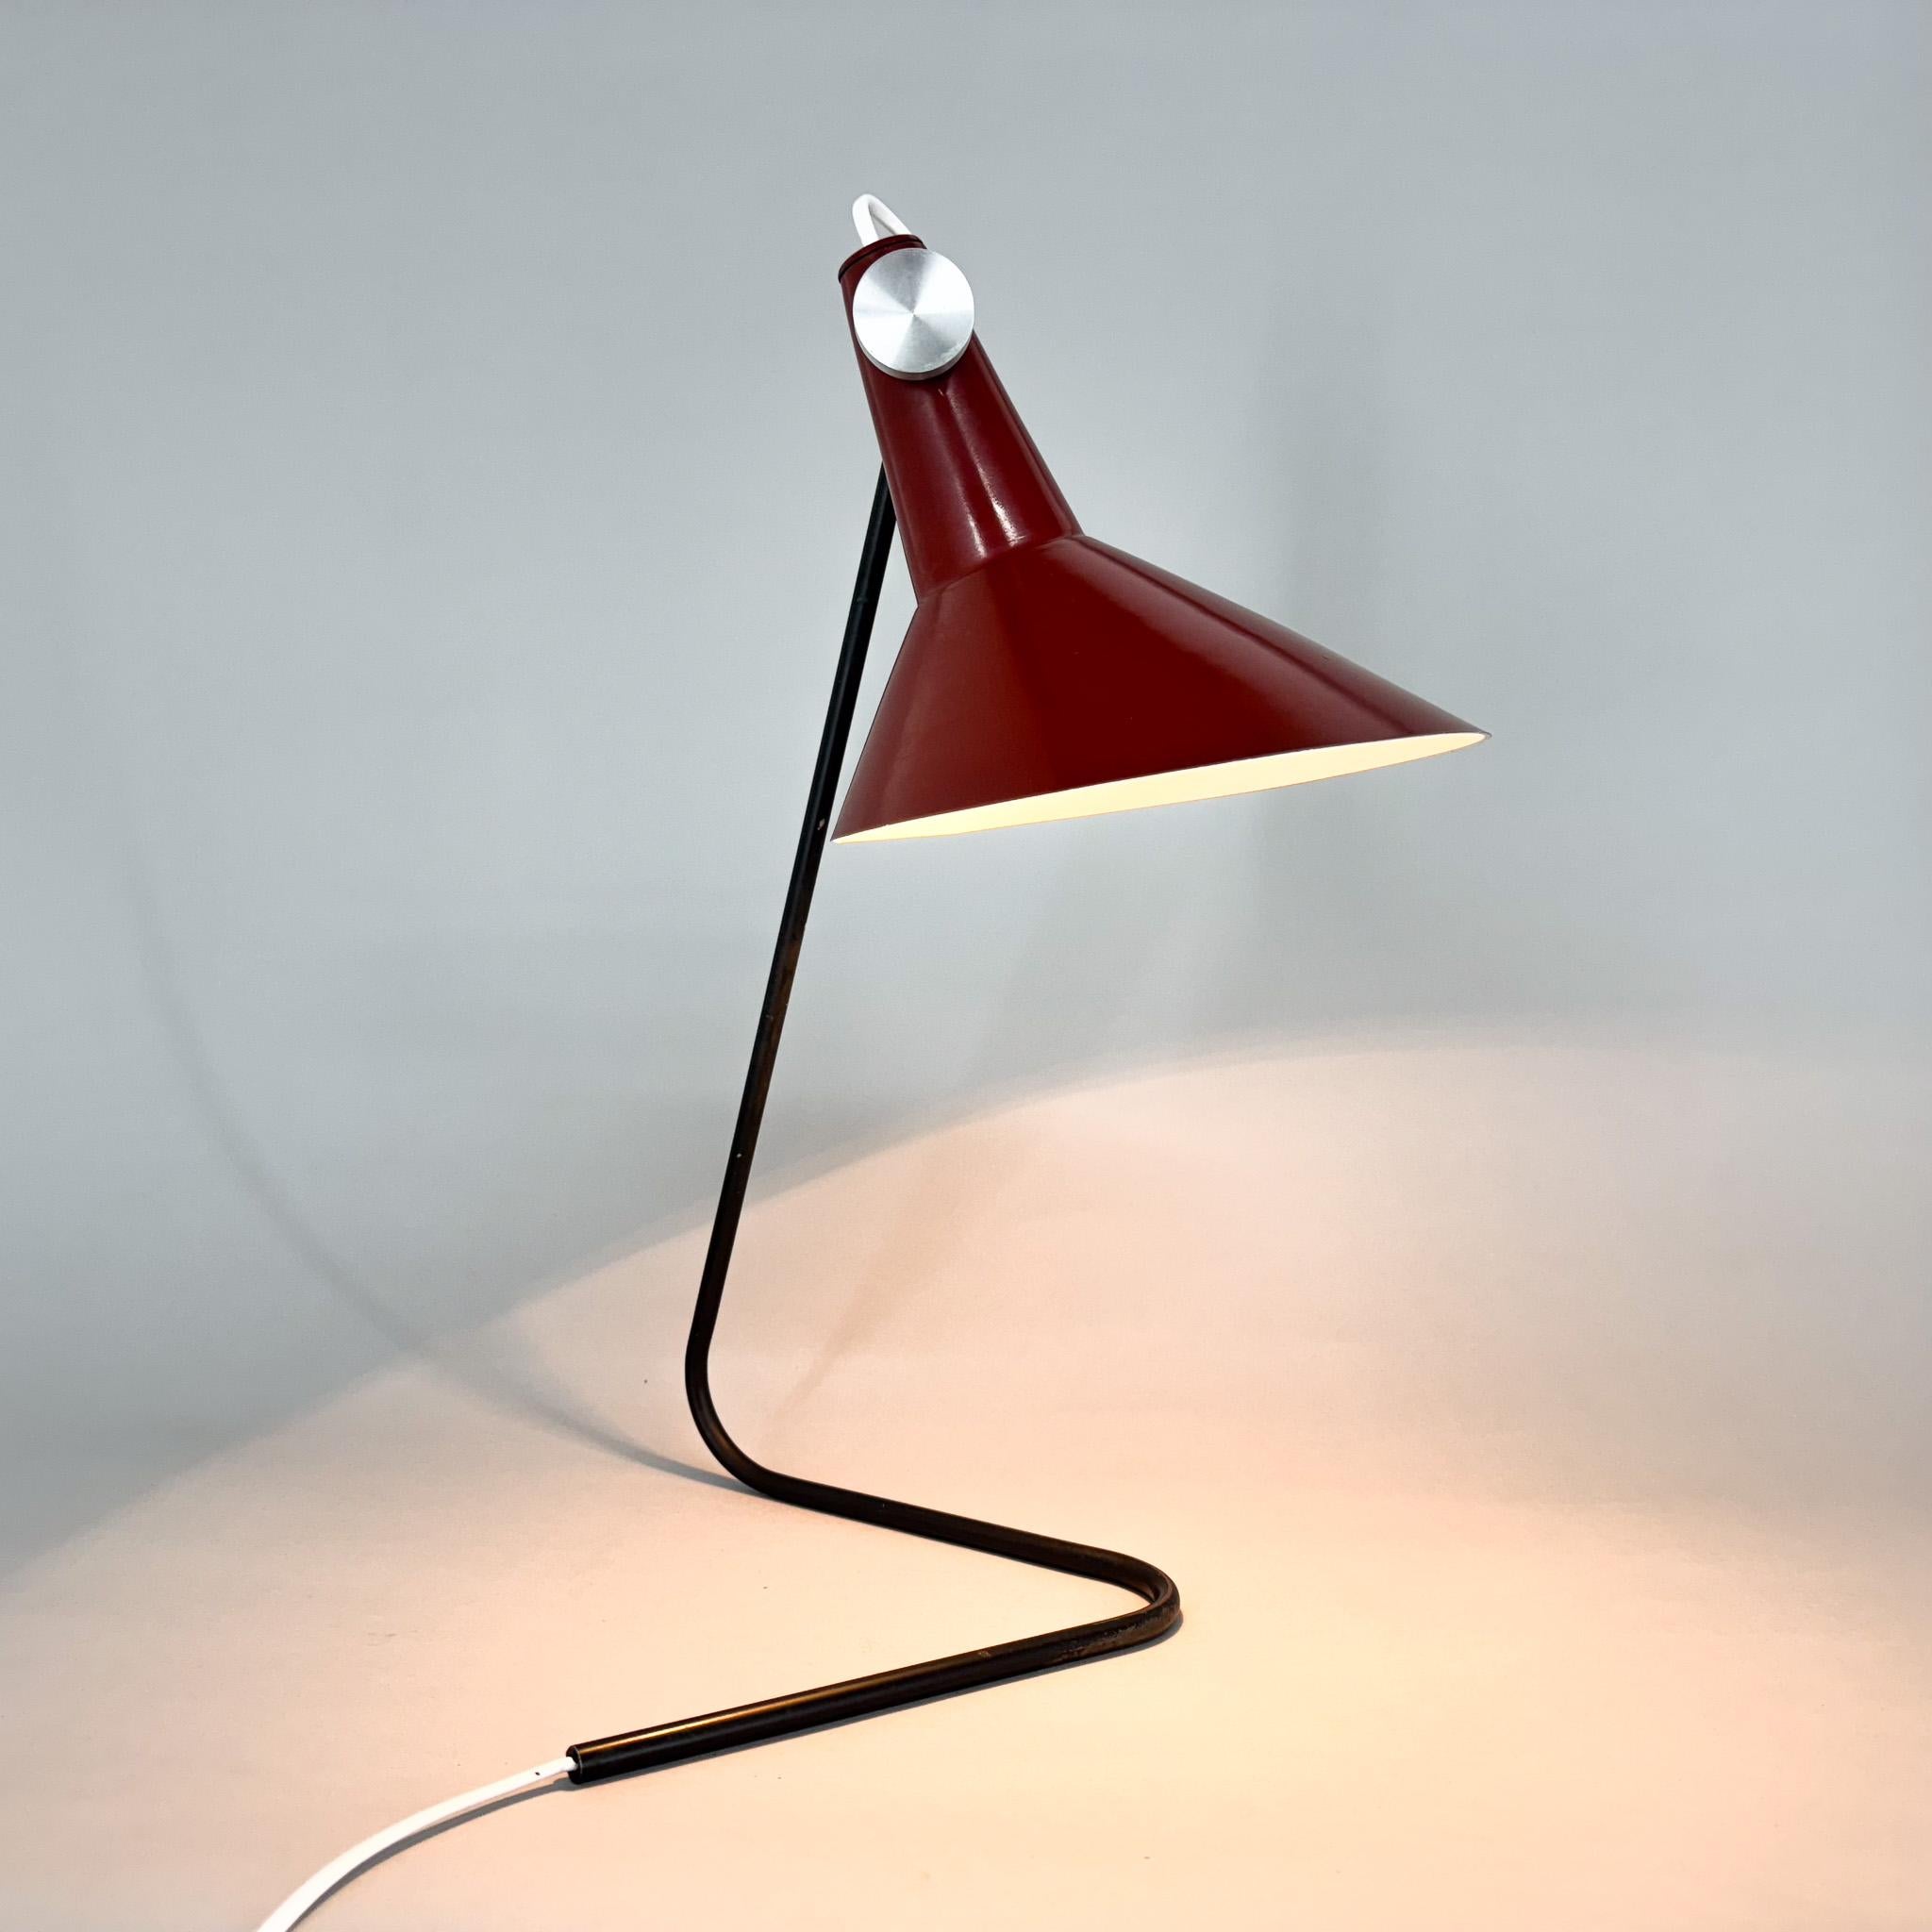  Vintage metal table lamp with adjustable lamp shade. Designed by famous Josef Hurka for Kovona in former Czechoslovakia in the 1960s. Type ST30. Bulb 1 x E26 - E27. US adapter included.